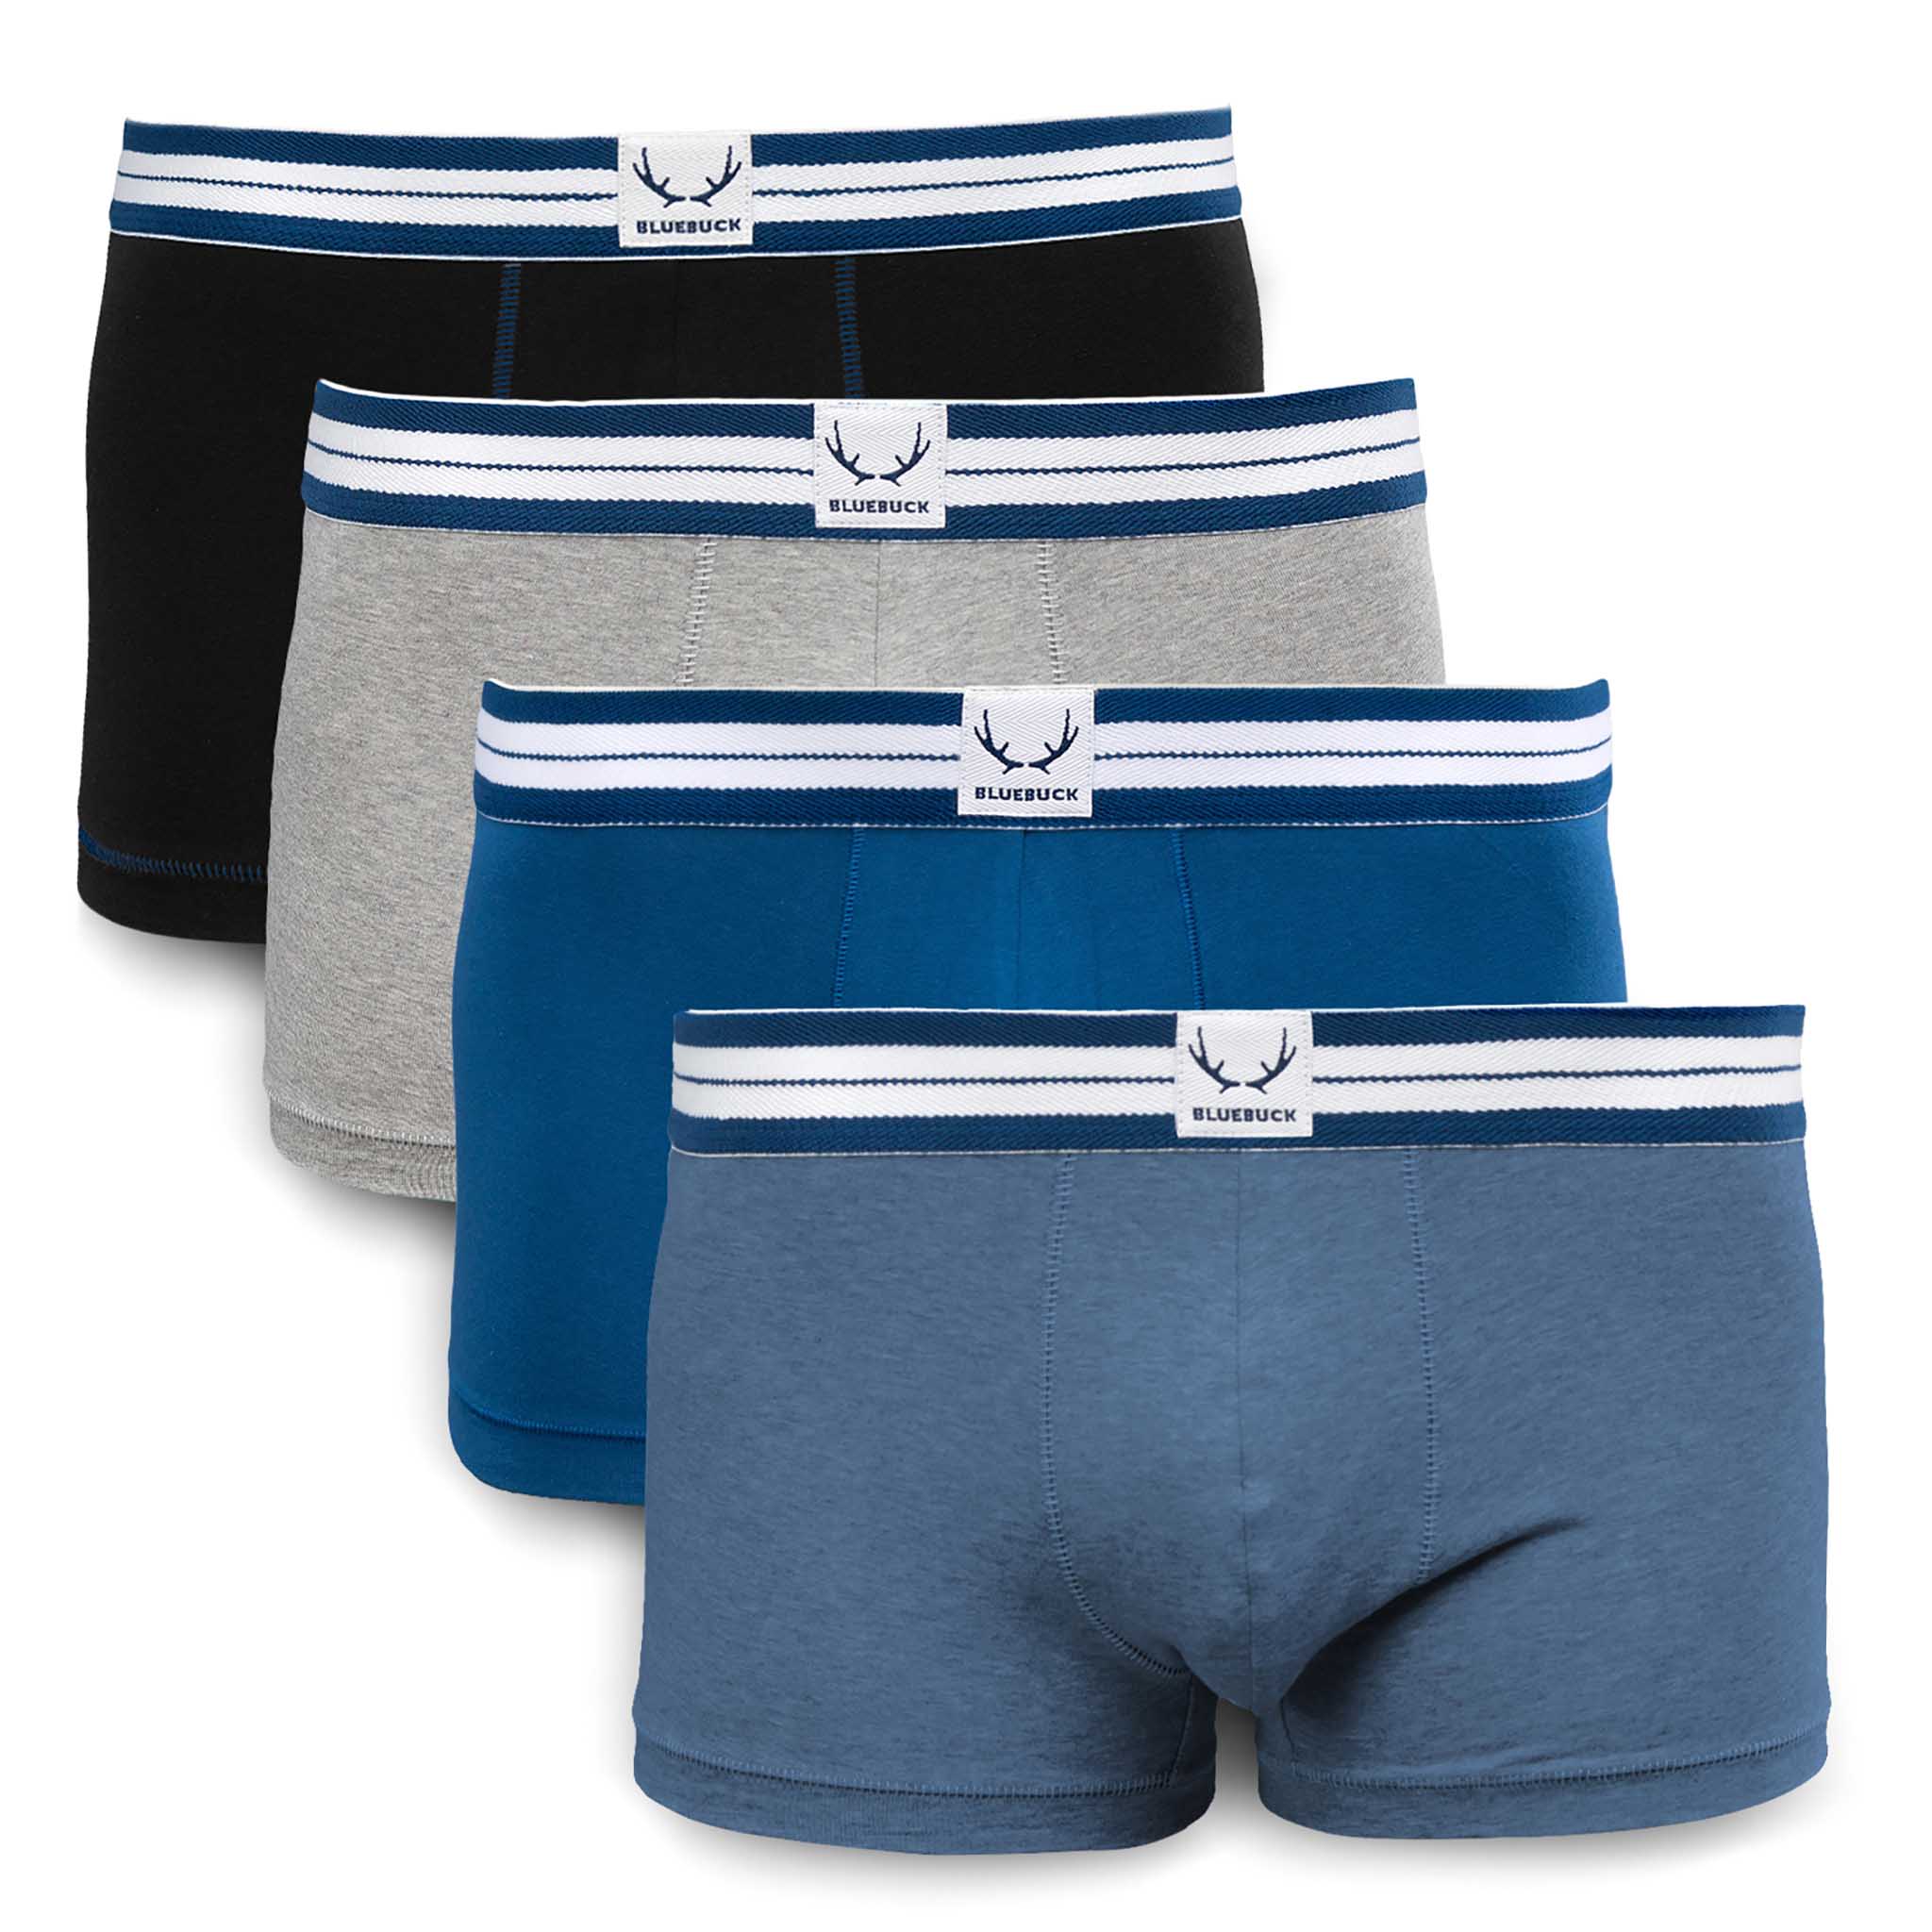 Classic boxer shorts 4-pack made of organic cotton from Bluebuck